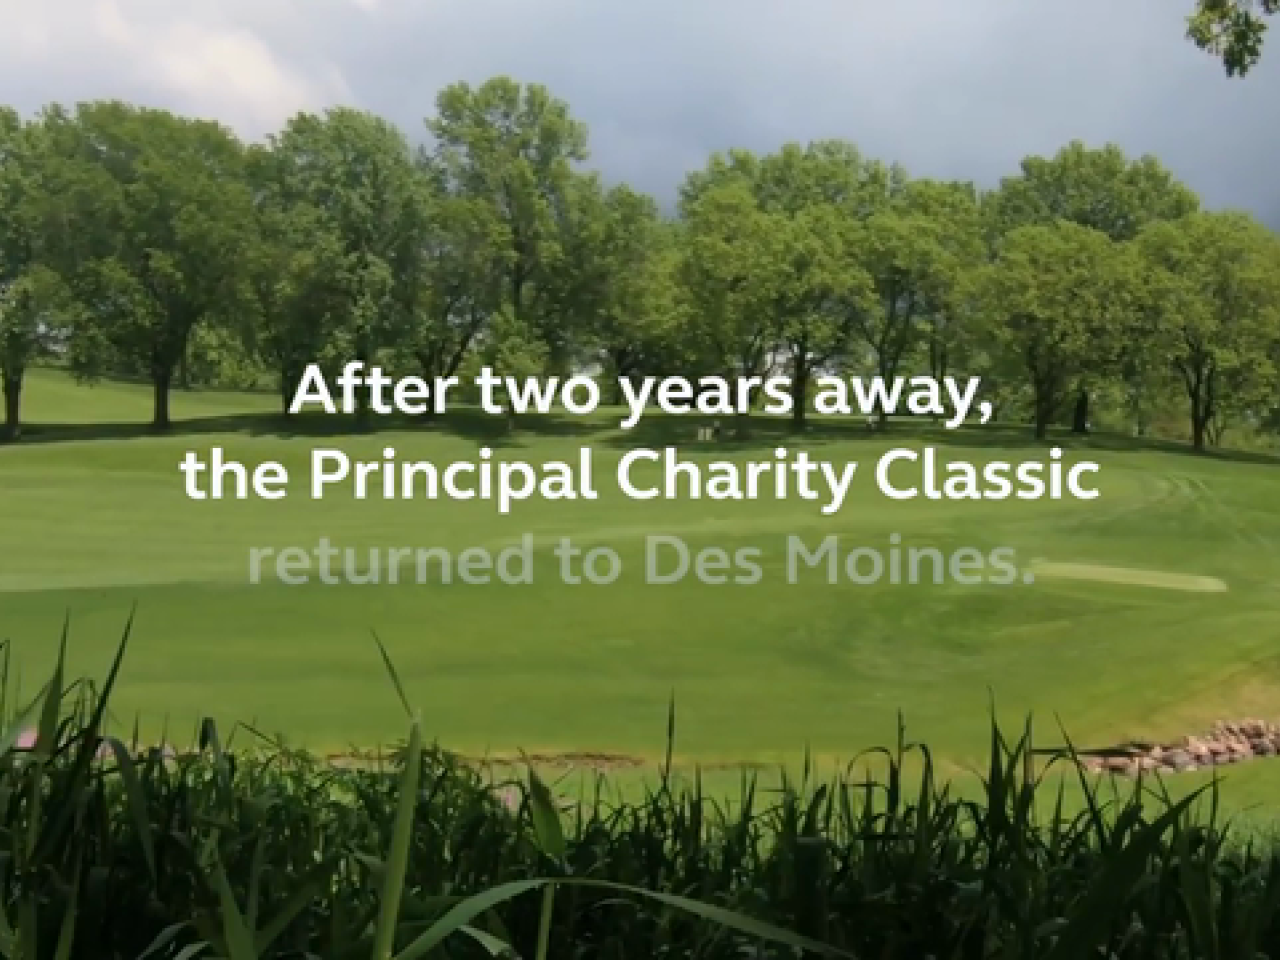 After two years away, the Principal Charity Classic returned to Des Moines.